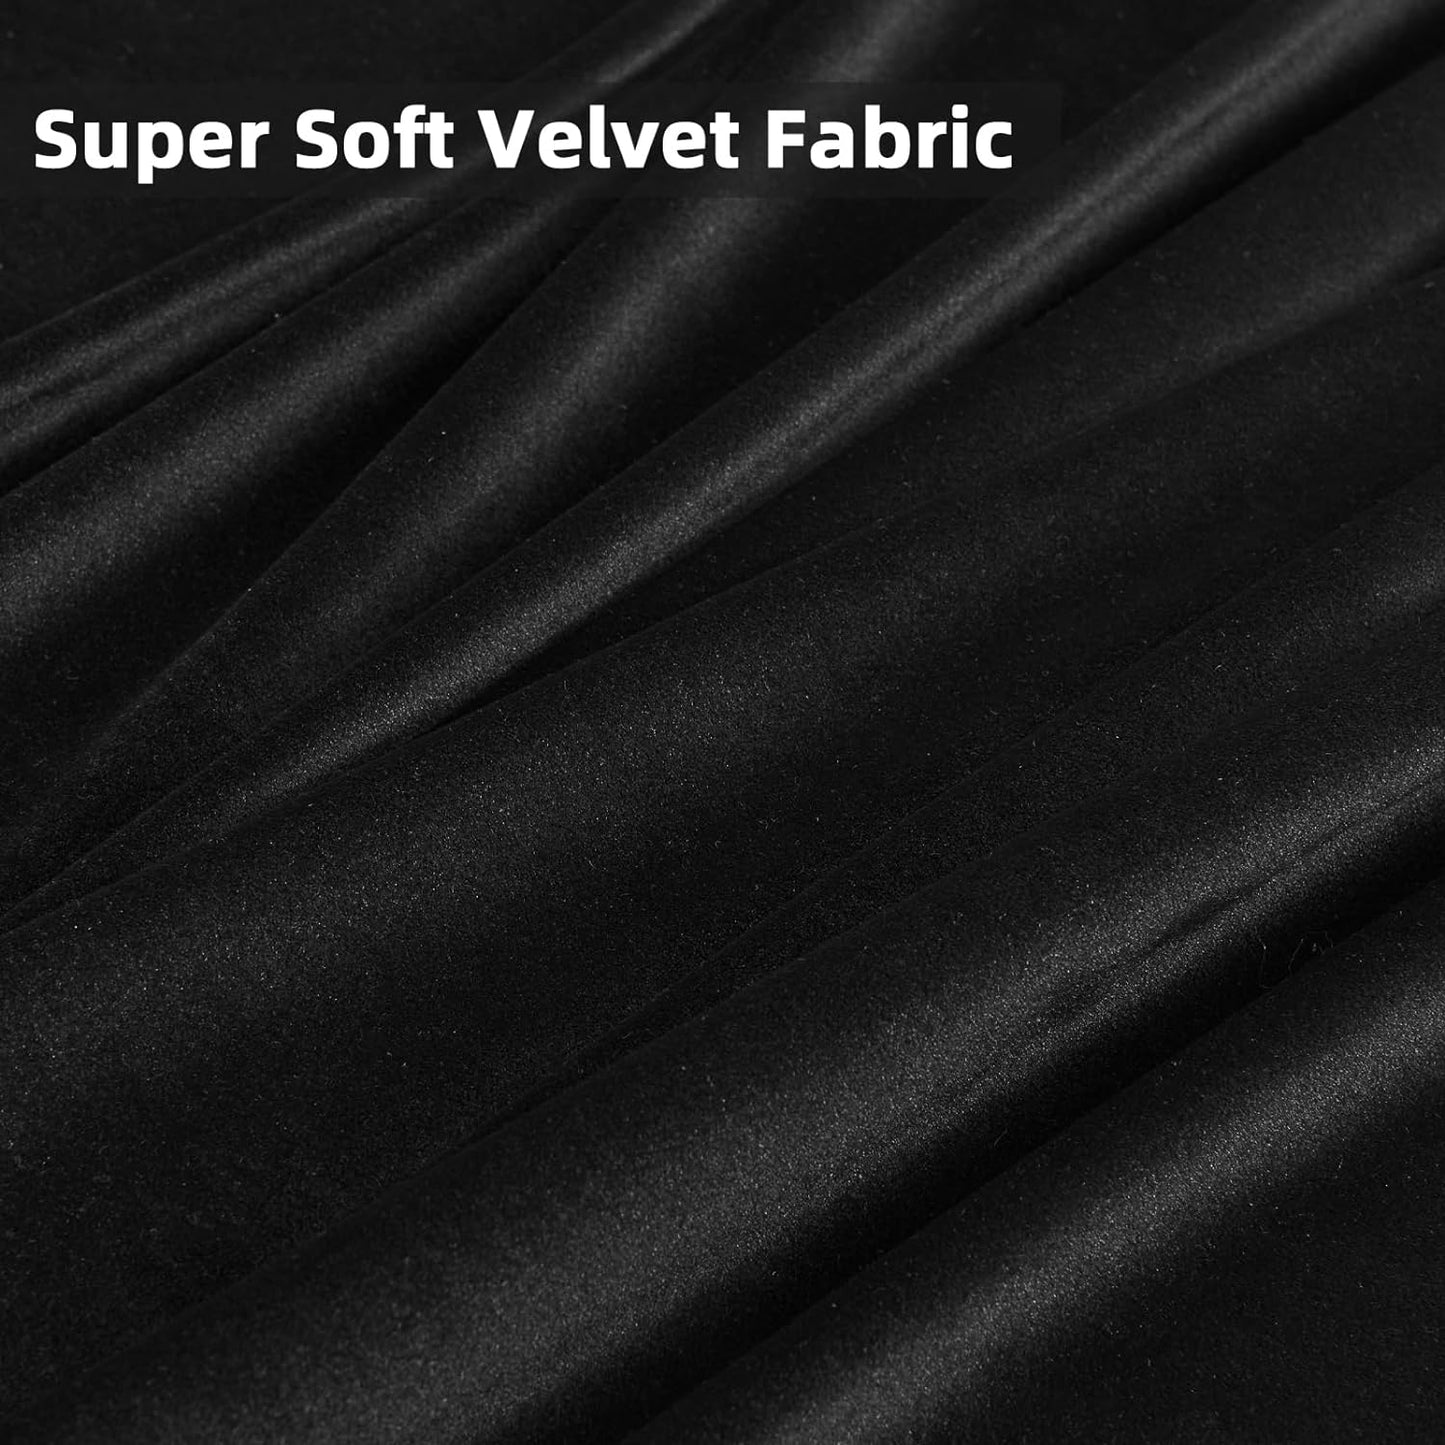 Joydeco Black Velvet Curtains 90 Inch Length 2 Panels, Luxury Blackout Rod Pocket Thermal Insulated Window Curtains, Super Soft Room Darkening Drapes for Living Dining Room Bedroom,W52 X L90 Inches  Joydeco   